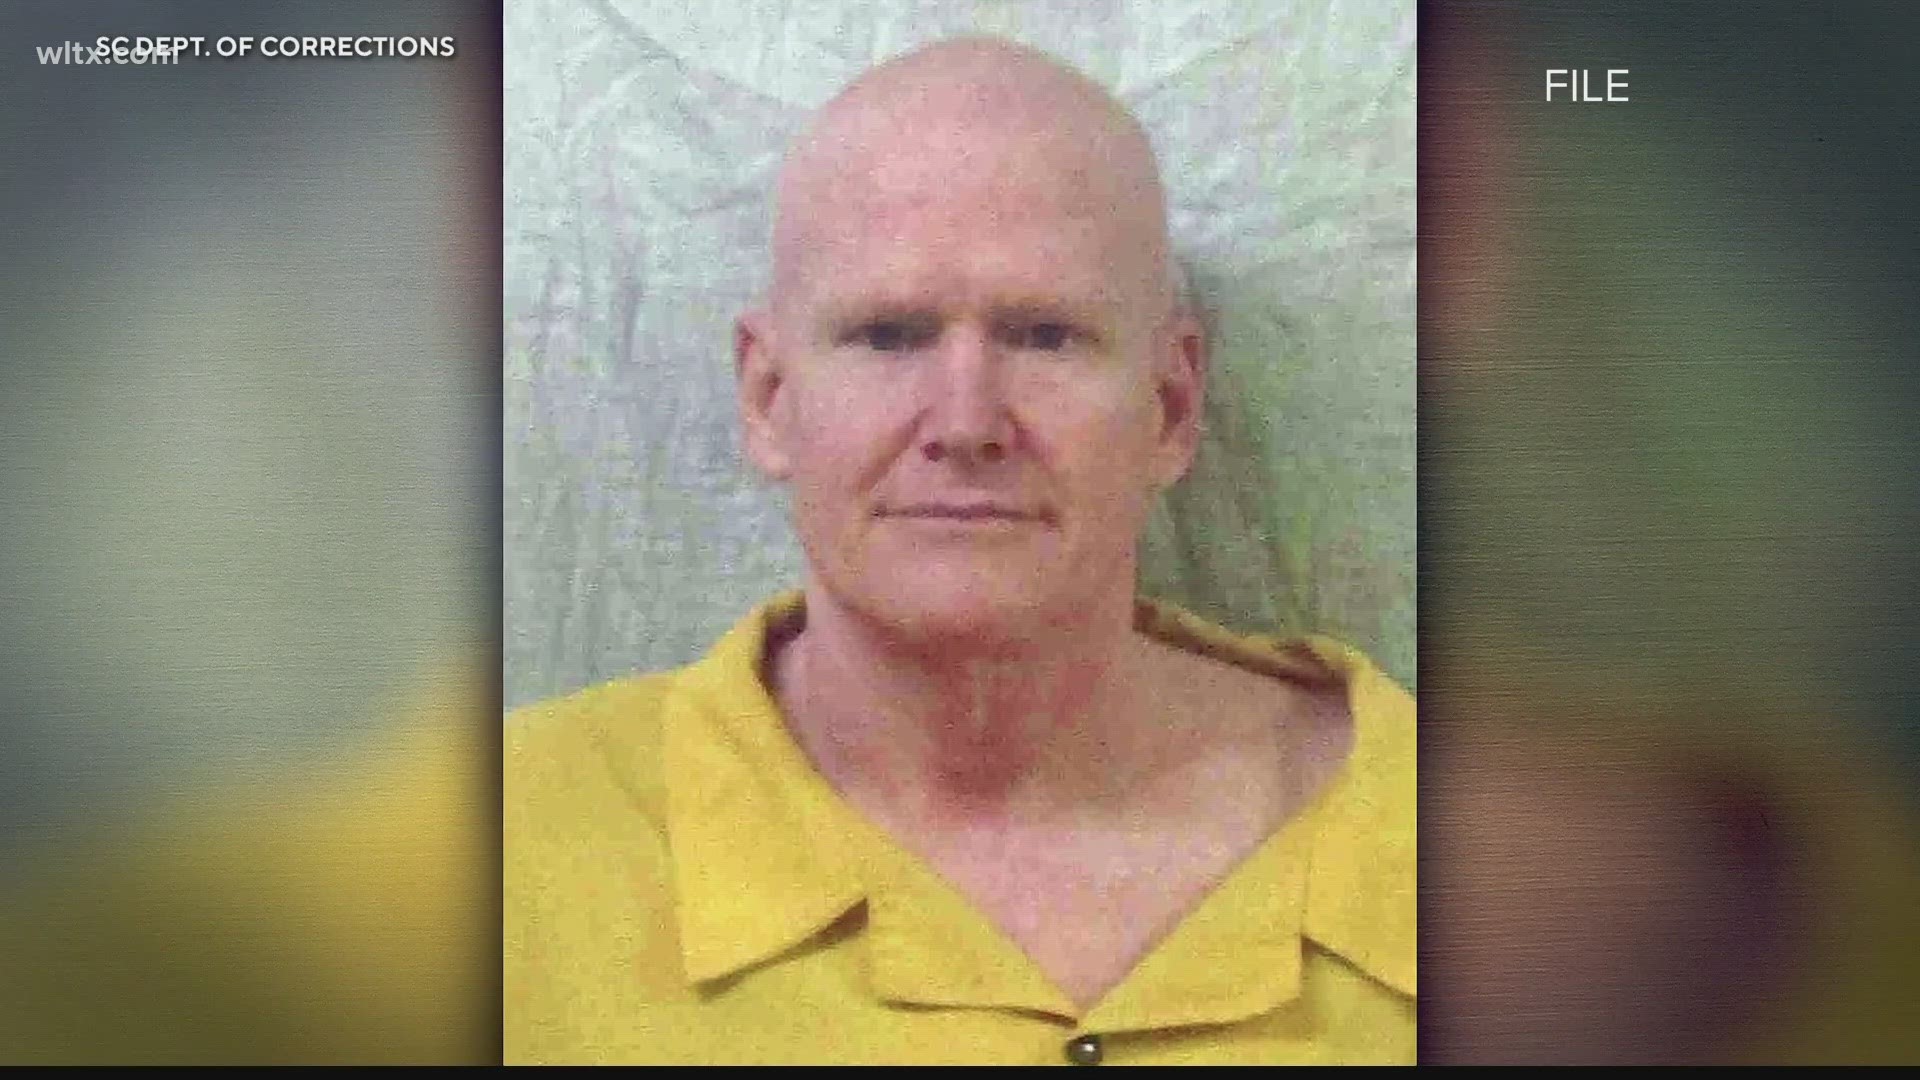 Convicted murderer Alex Murdaugh has been moved to a protective custody unit inside a maximum security South Carolina prison.